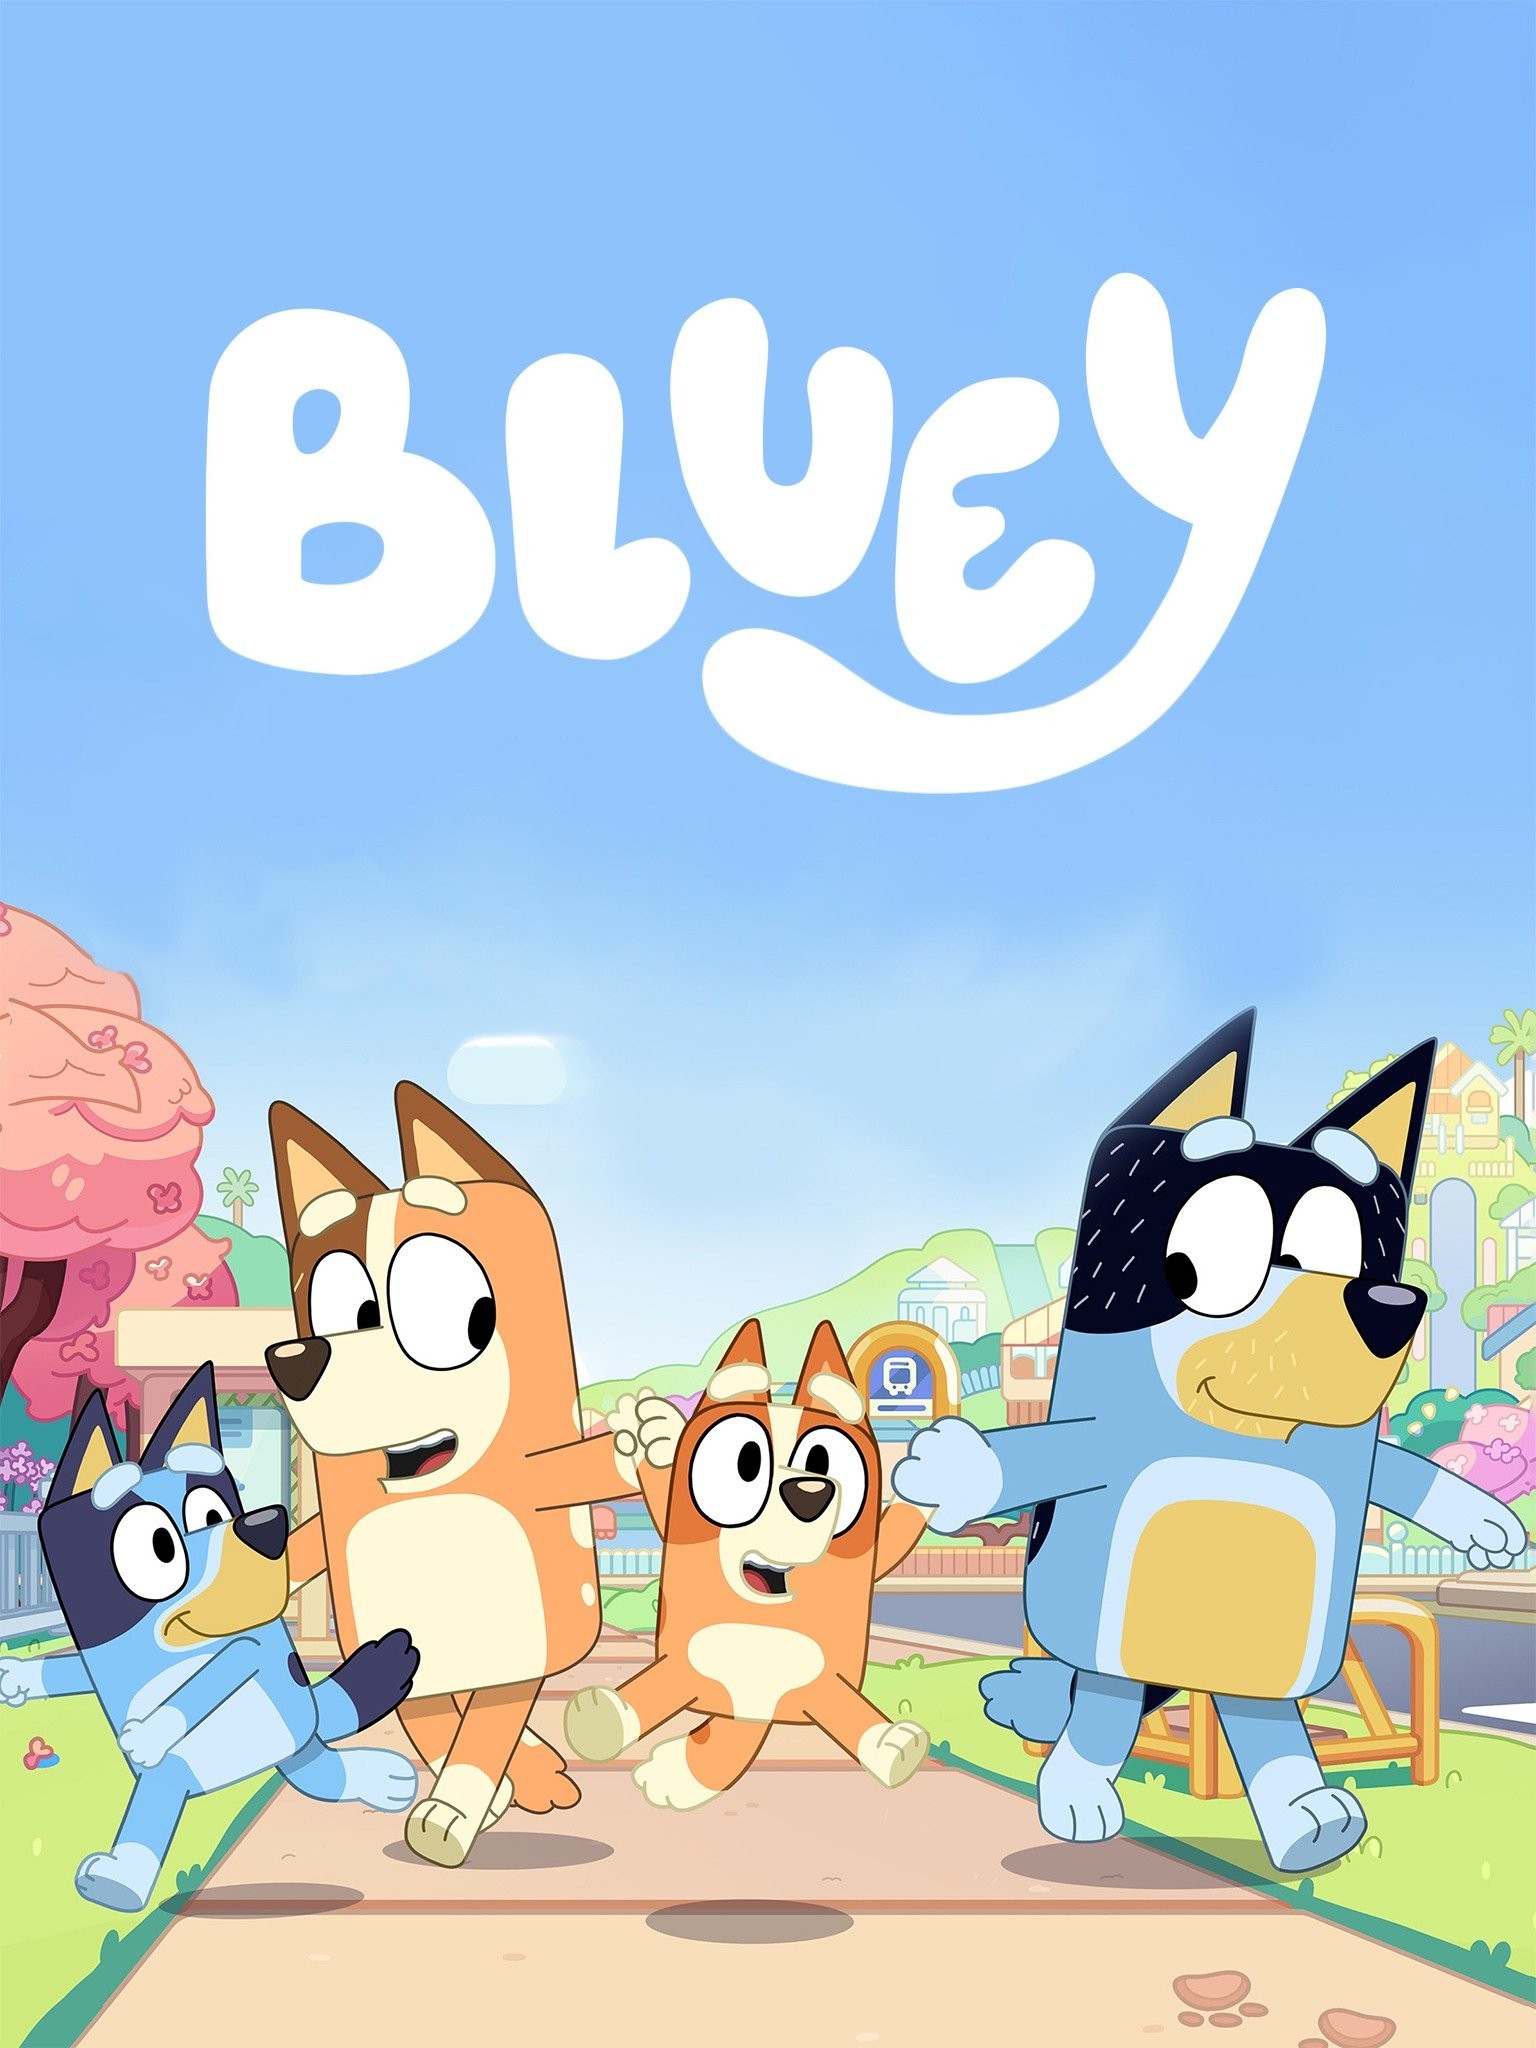 Bluey Cold Box - Bluey Official Website